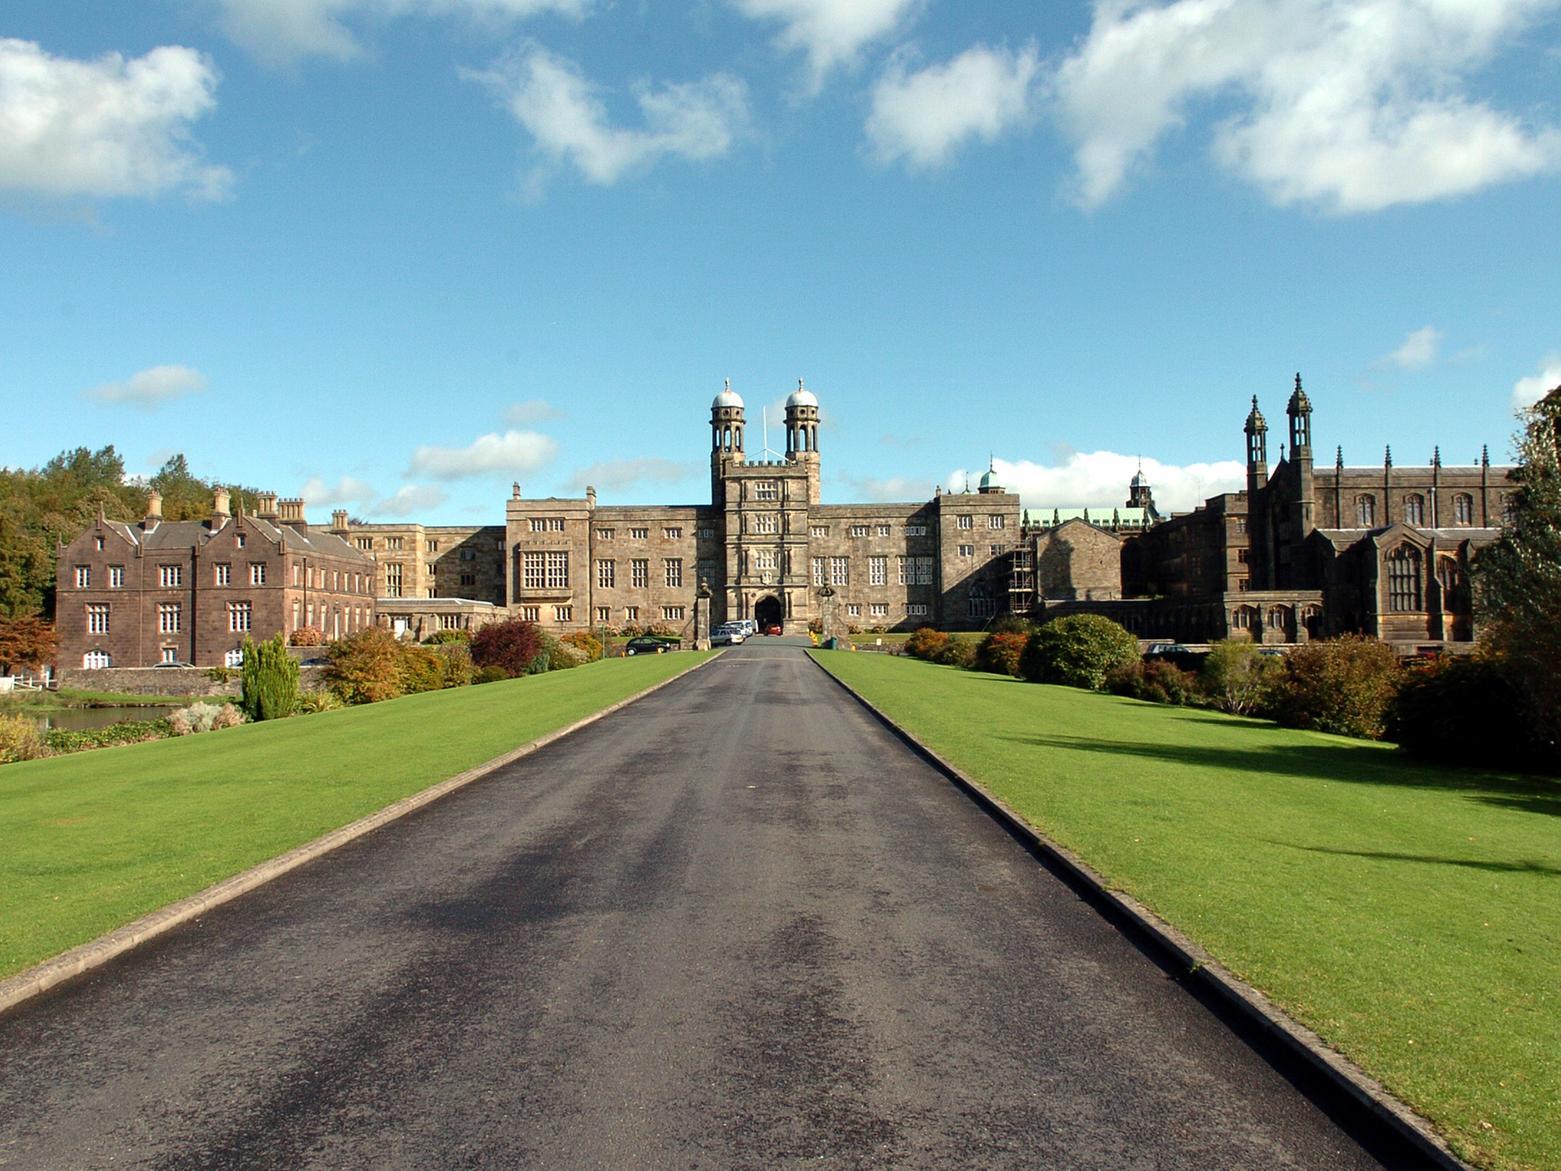 Walk in the footsteps of author J.R.R. Tolkien who regularly stayed at Stonyhurst College in the Ribble Valley. This five and a half mile walk explores the richly beautiful surroundings that inspired him